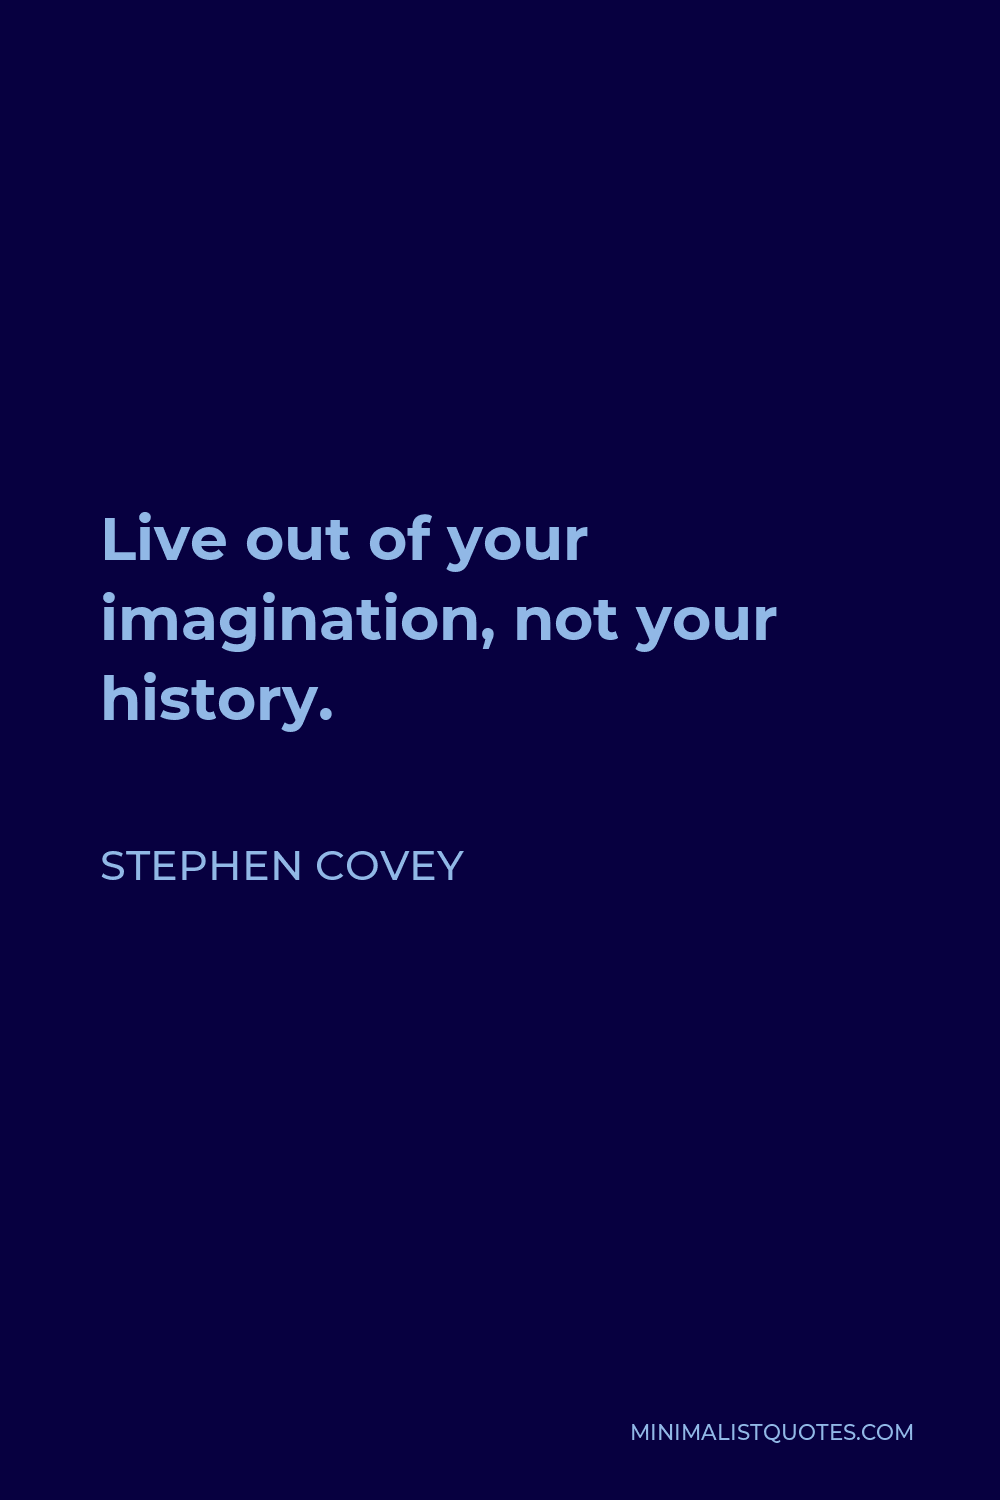 Stephen Covey Quote - Live out of your imagination, not your history.